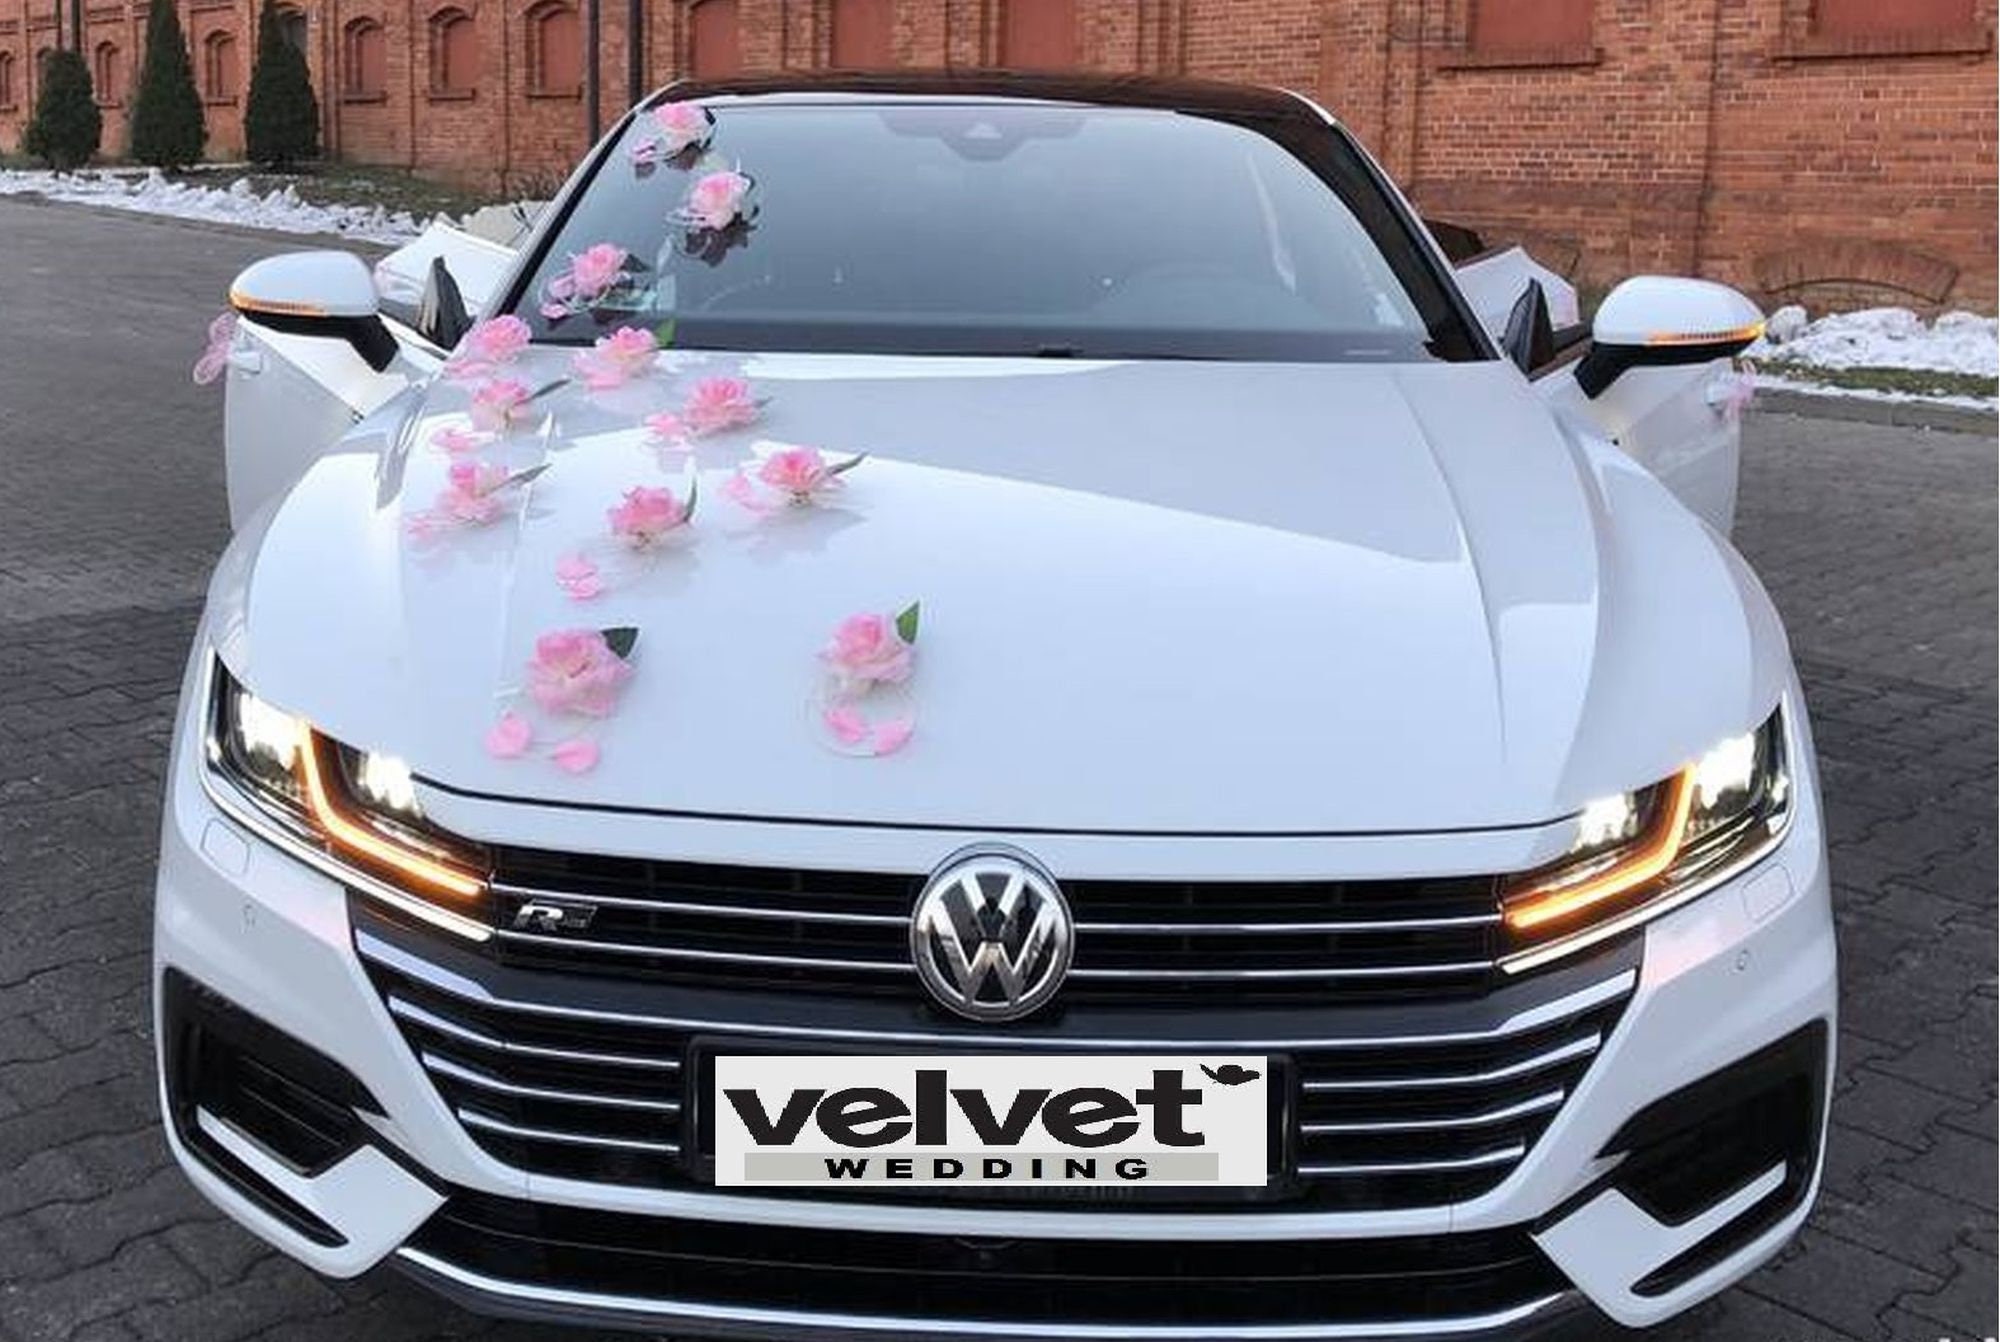 bows voiture de mariage dé, hearts with roses wedding car decorations ribbons